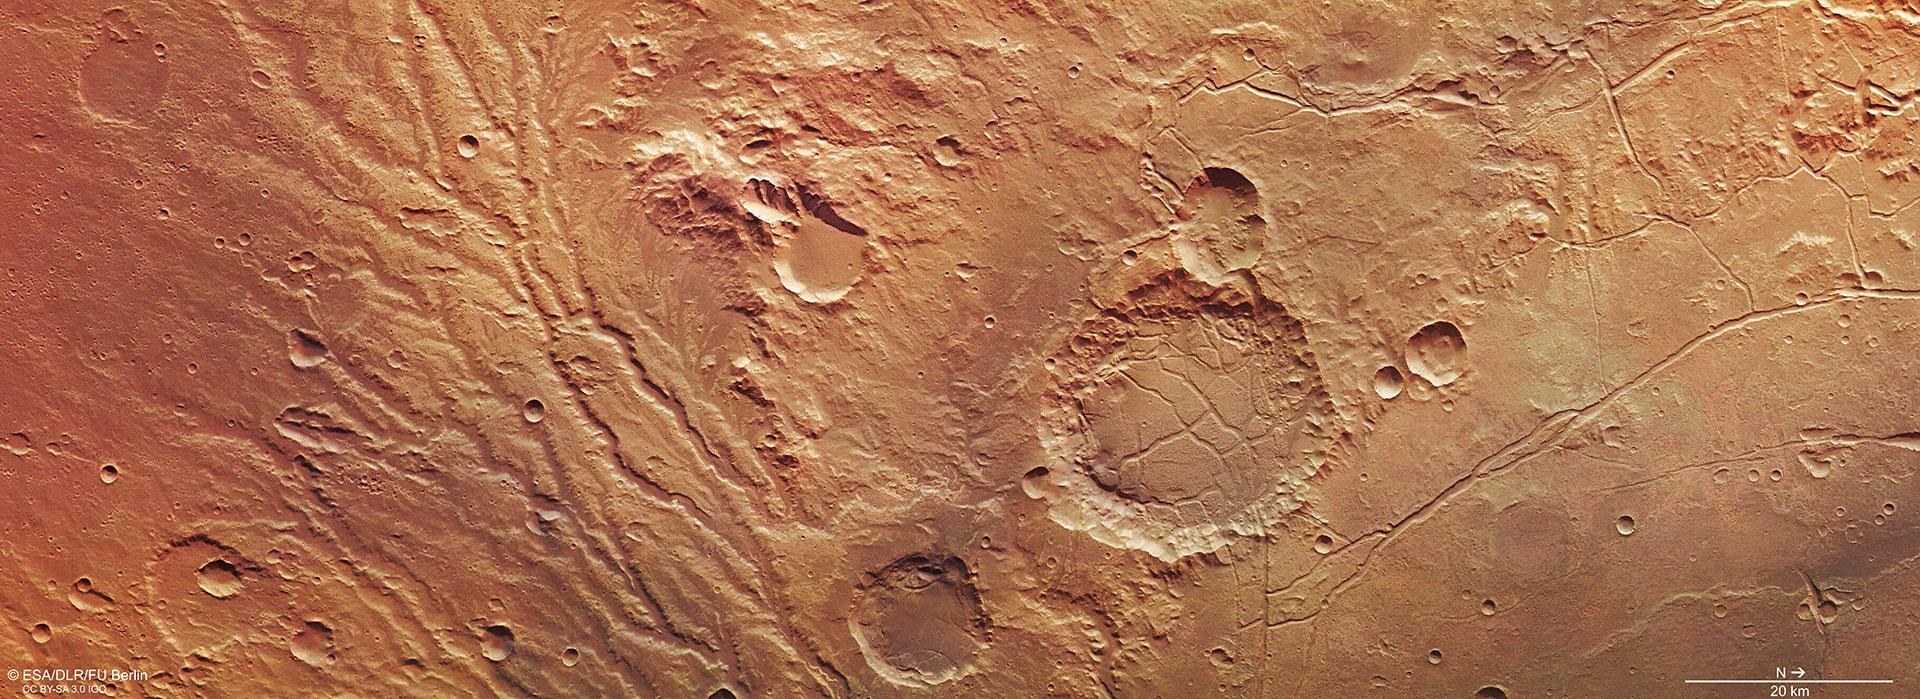 True colour plan view of the western part of Arda Valles